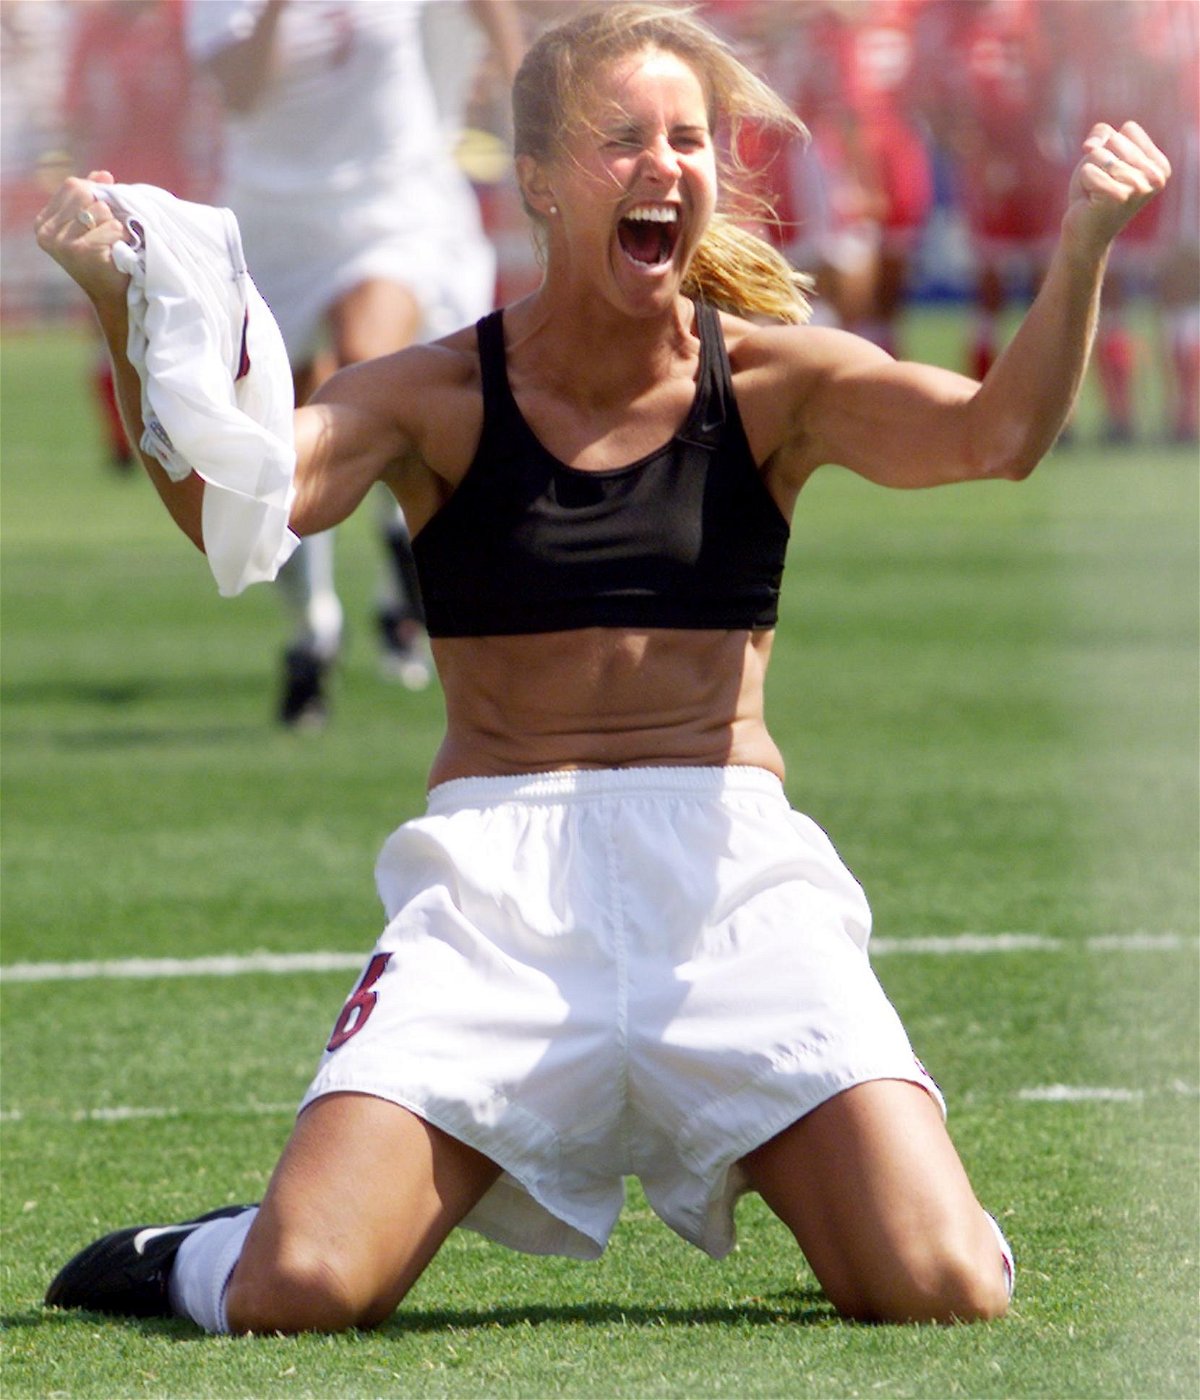 <i>HECTOR MATA/AFP/AFP/Getty Images</i><br/>Brandi Chastain celebrates after scoring in the penalty shootout in the  Women's World Cup final in 1999.